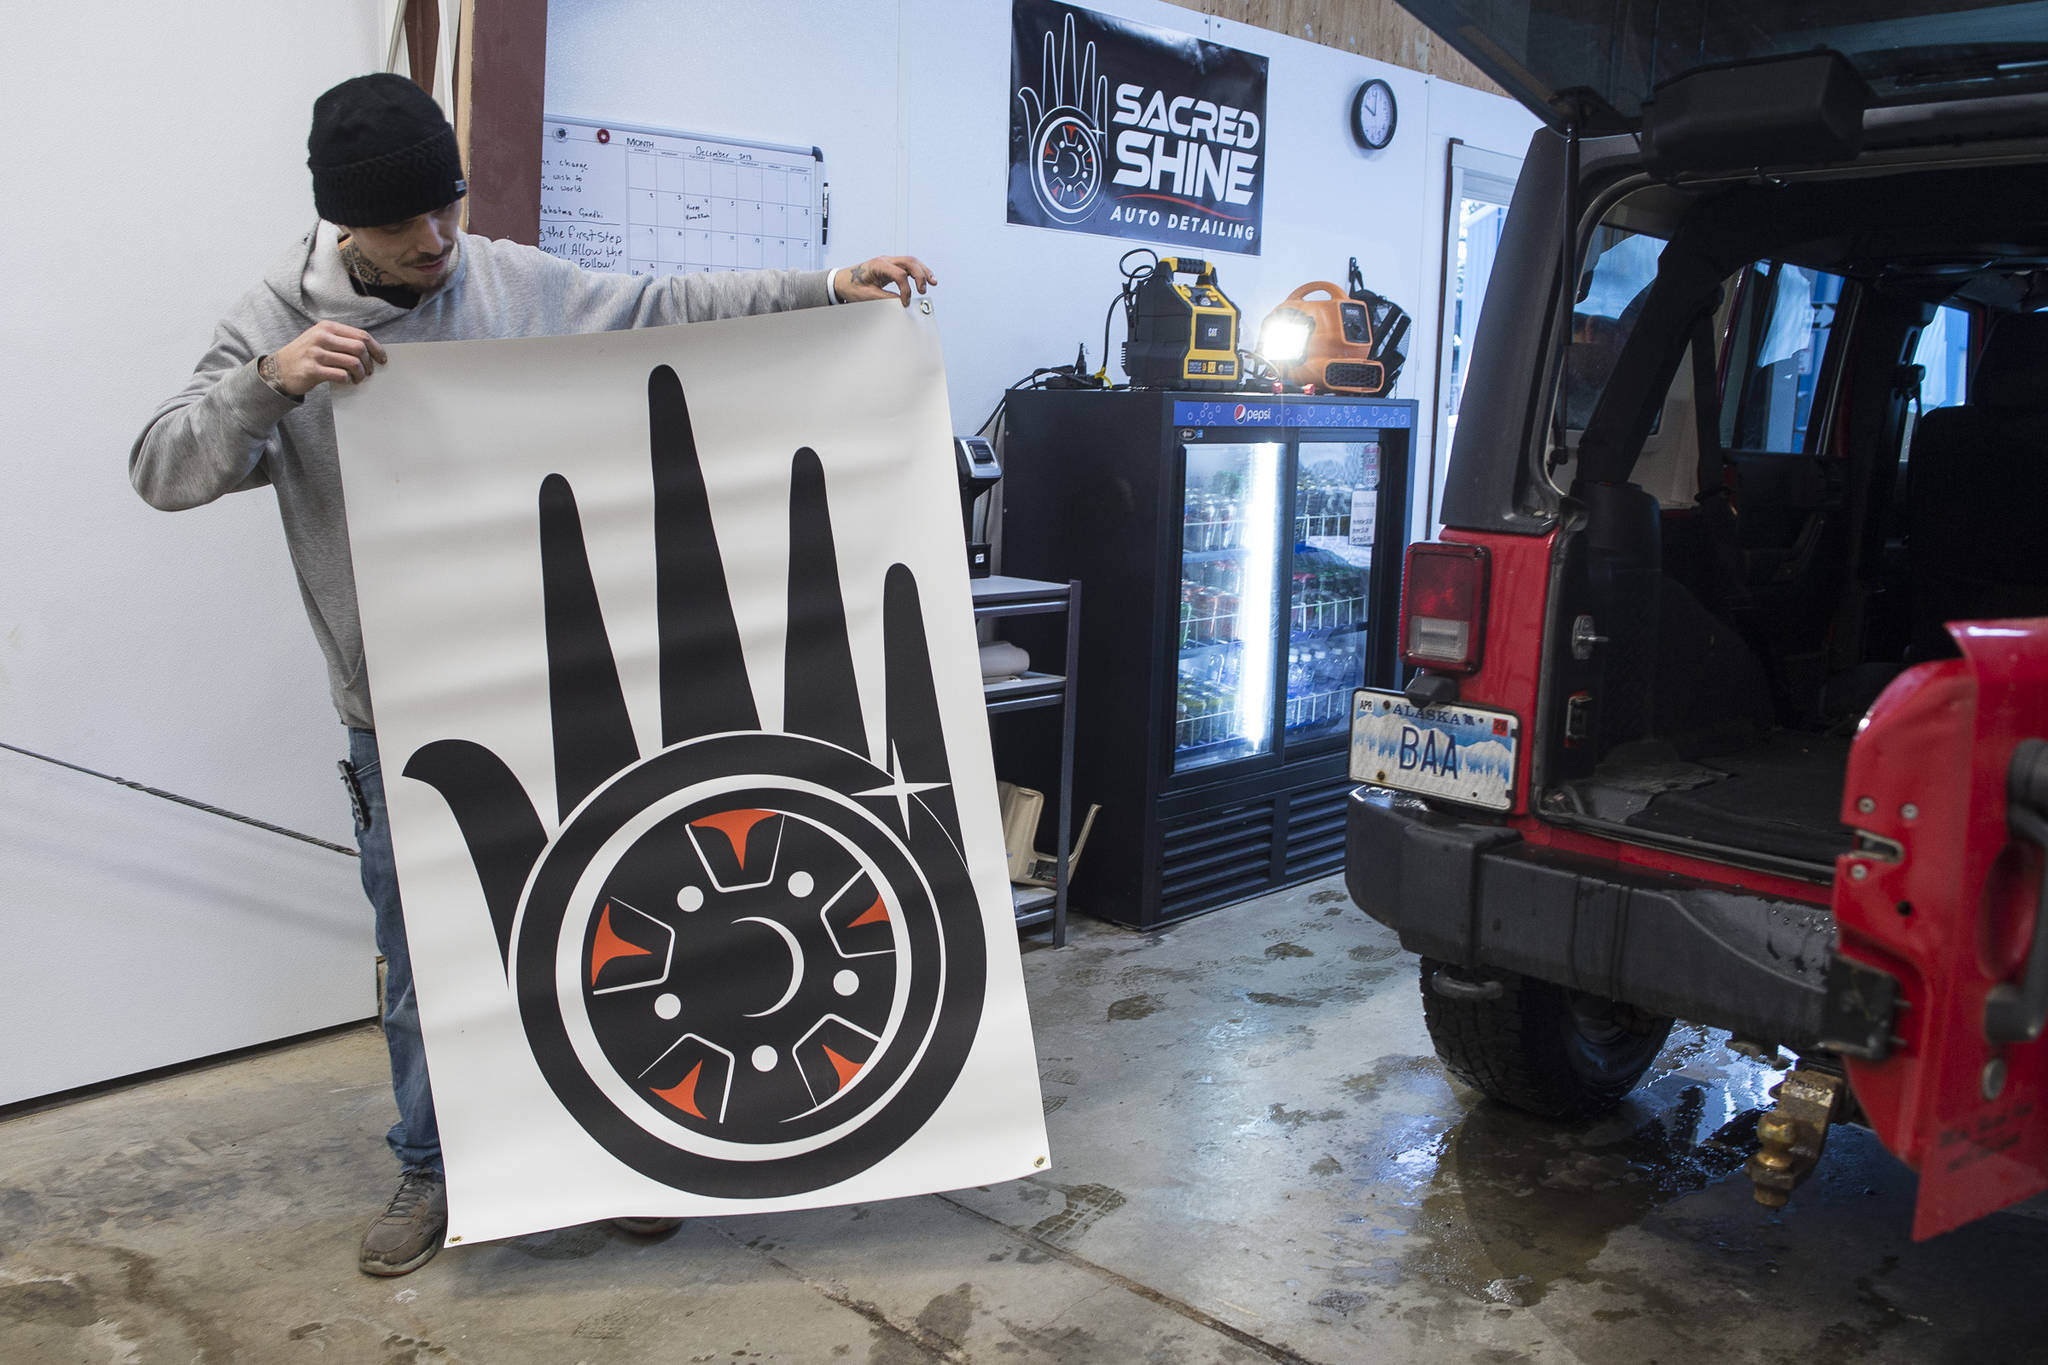 Lead Detailer Calvin Olsen shows the logo developed for a new auto detailing business called Sacred Shine offered by the Central Council of the Tlingit and Haida Indian Tribes of Alaska on Friday, Dec. 21, 2018. The logo was designed by tribal member Miciana Hutcherson. (Michael Penn | Juneau Empire)